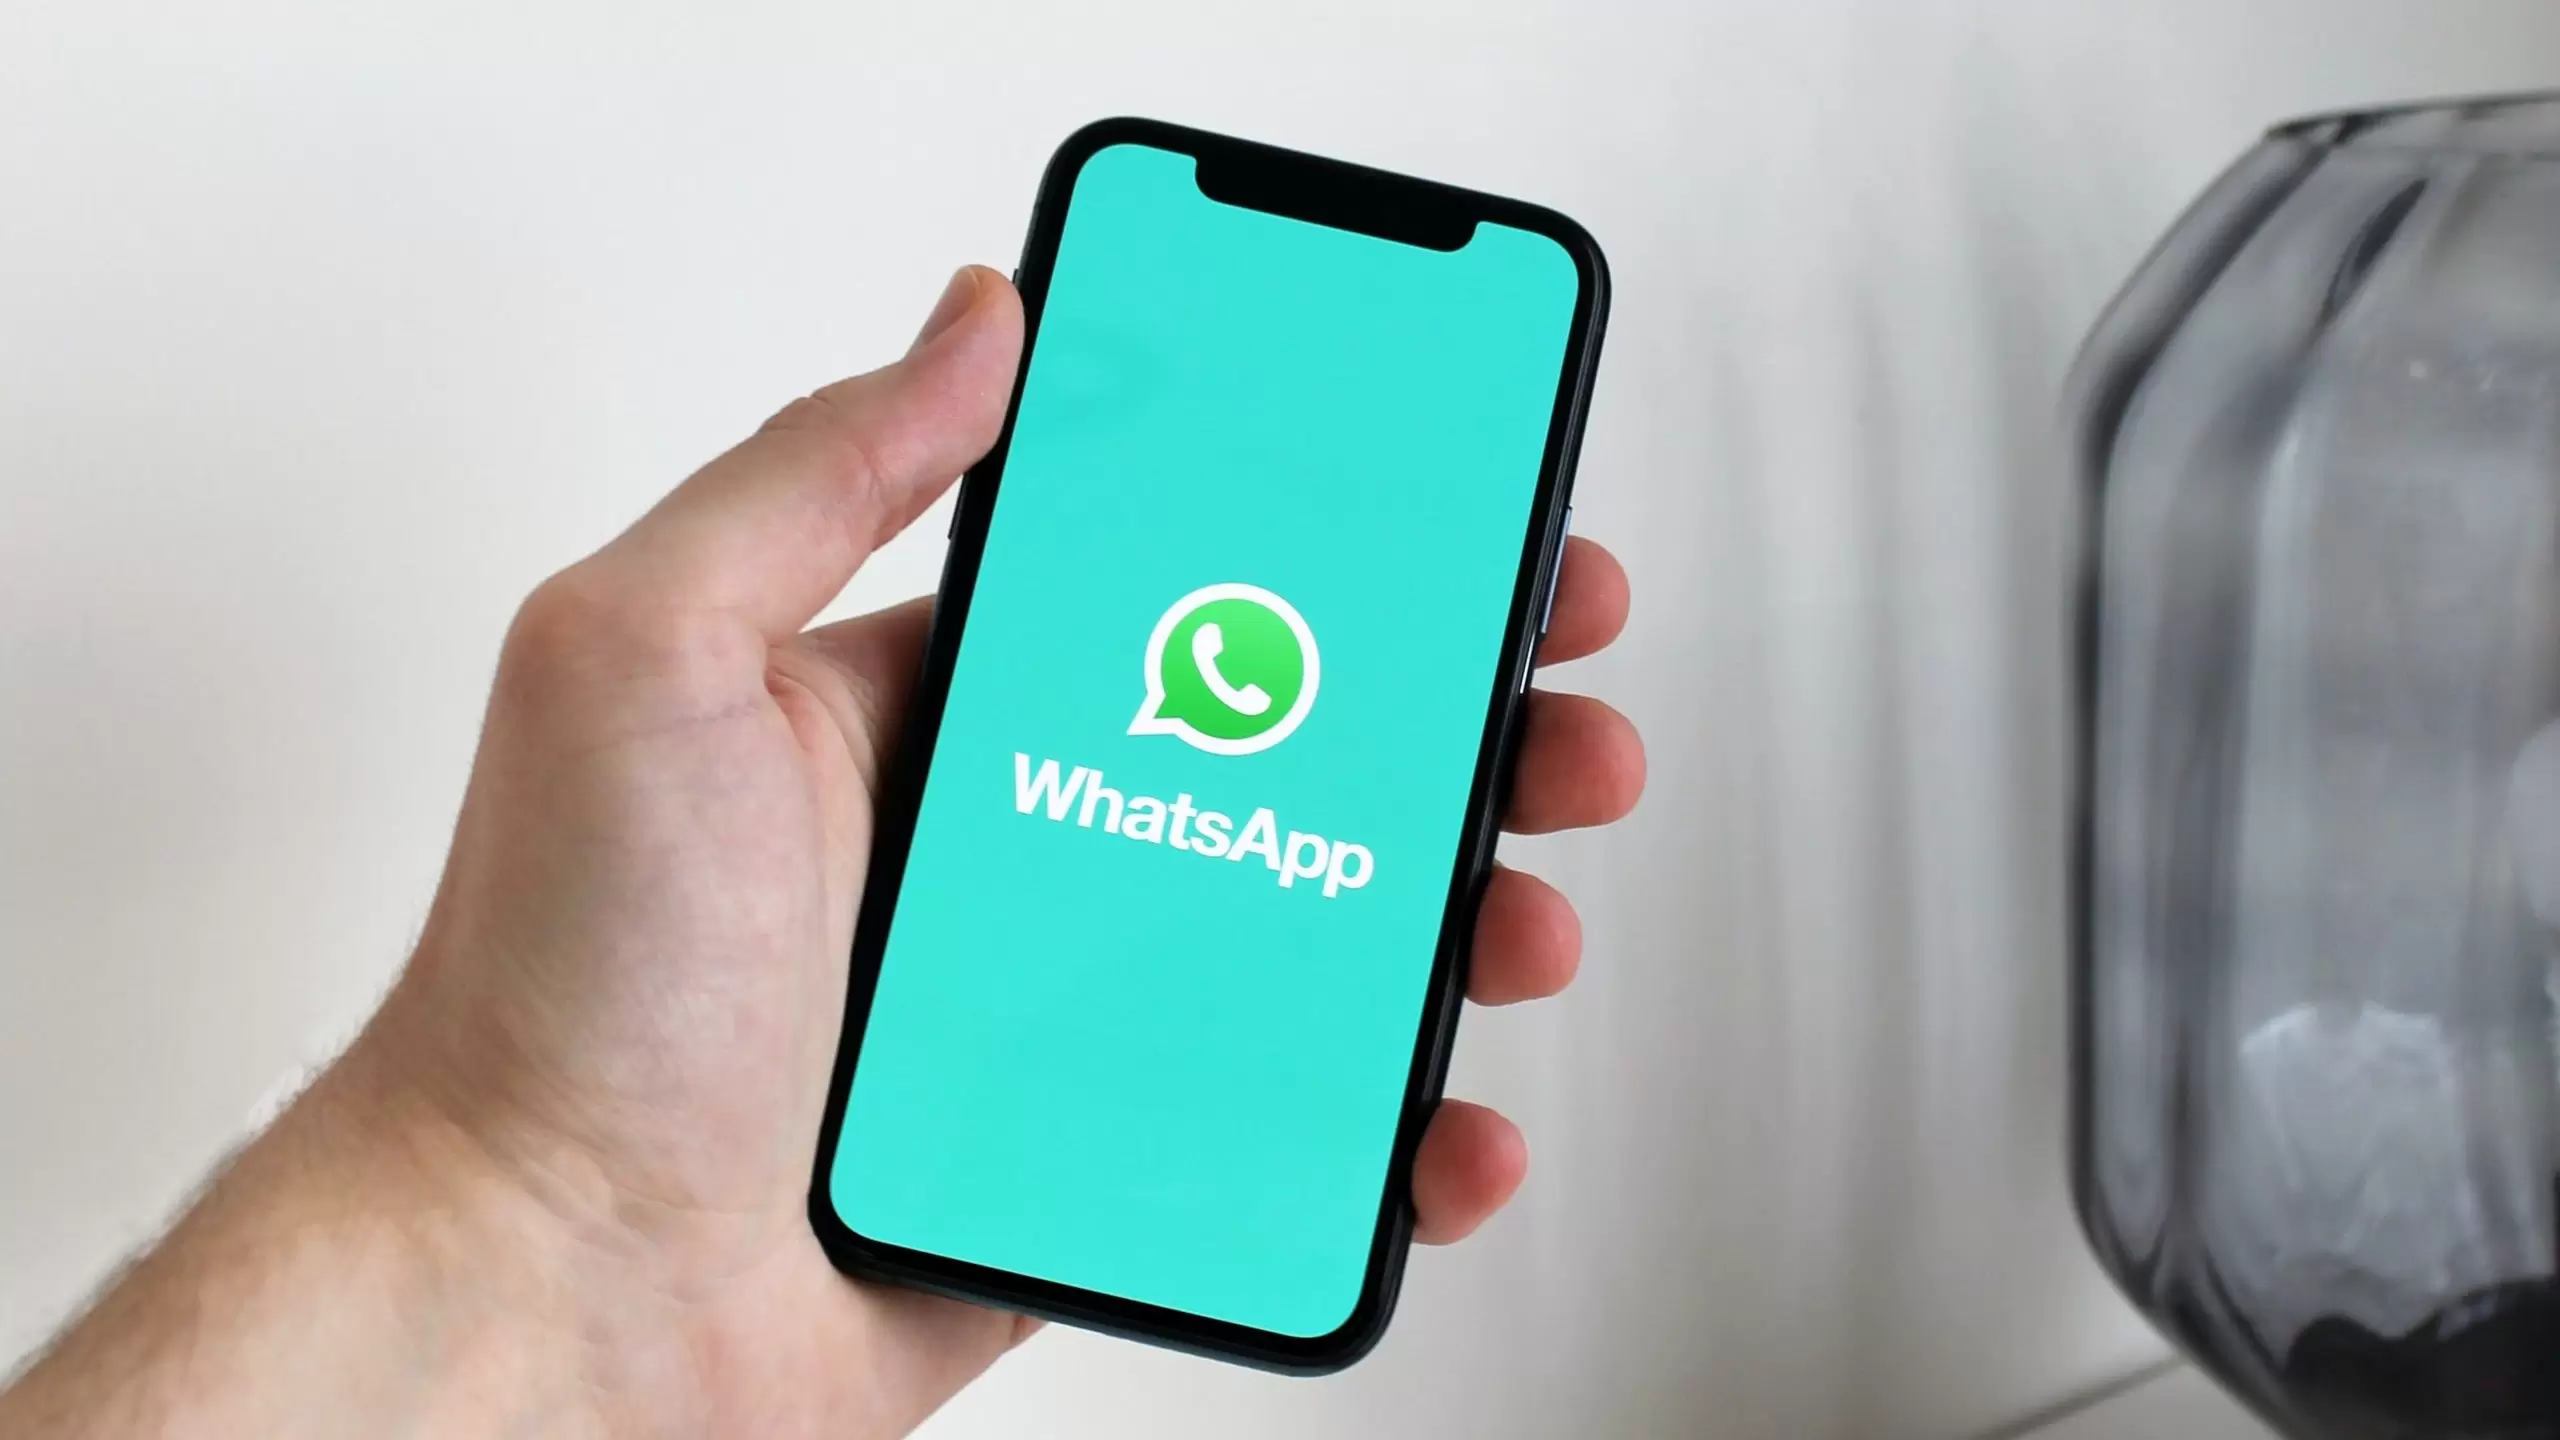 WhatsApp: Will the accounts of those who do not accept the new terms be banned?  paying off